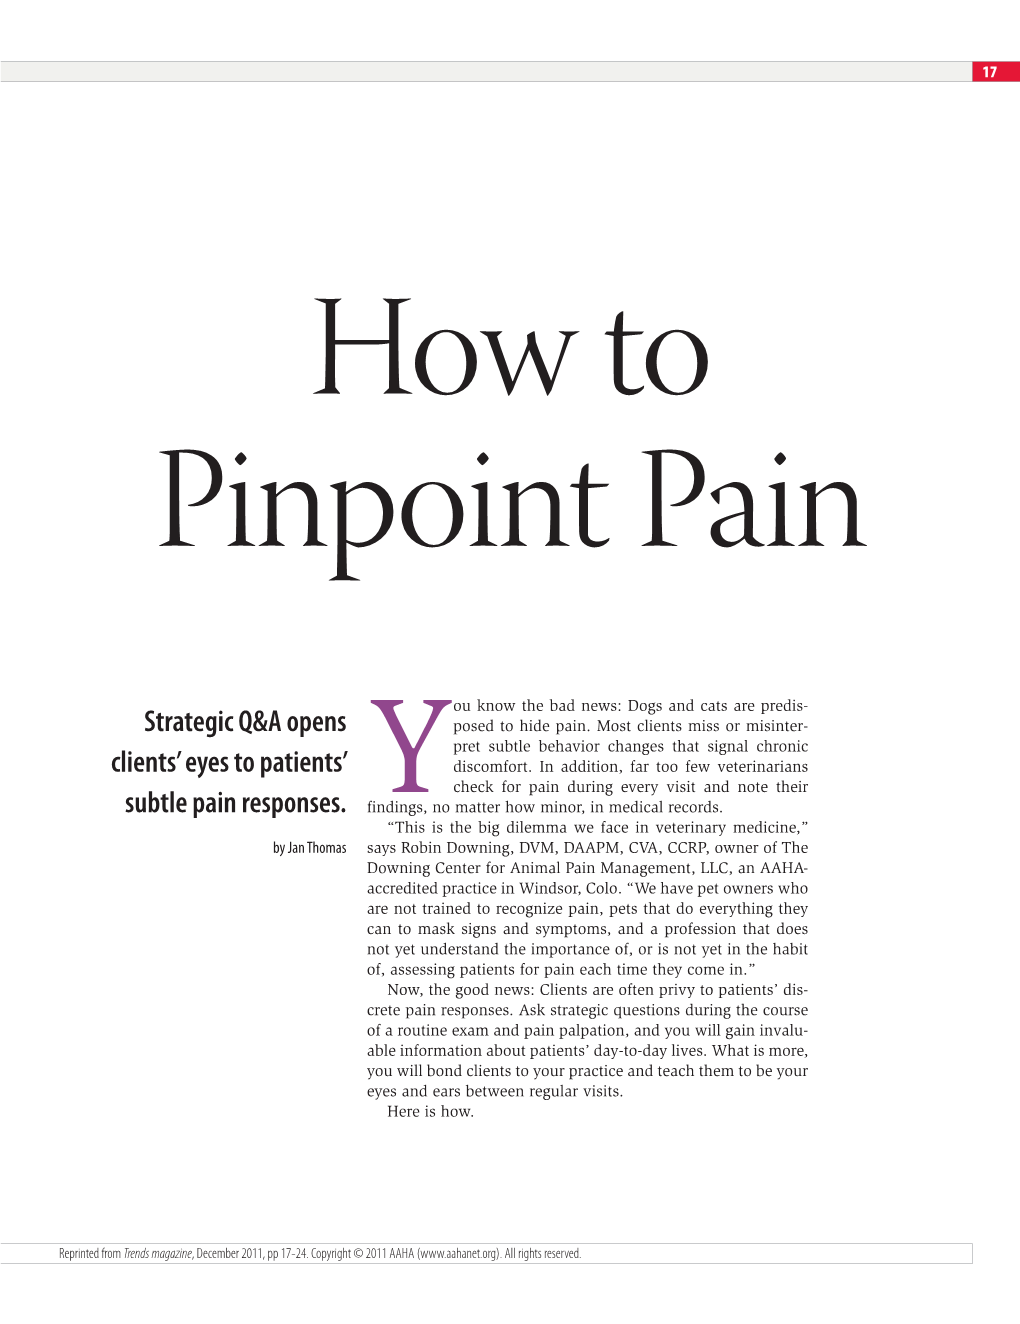 How to Pinpoint Pain and Pain: How Much Do You Know?